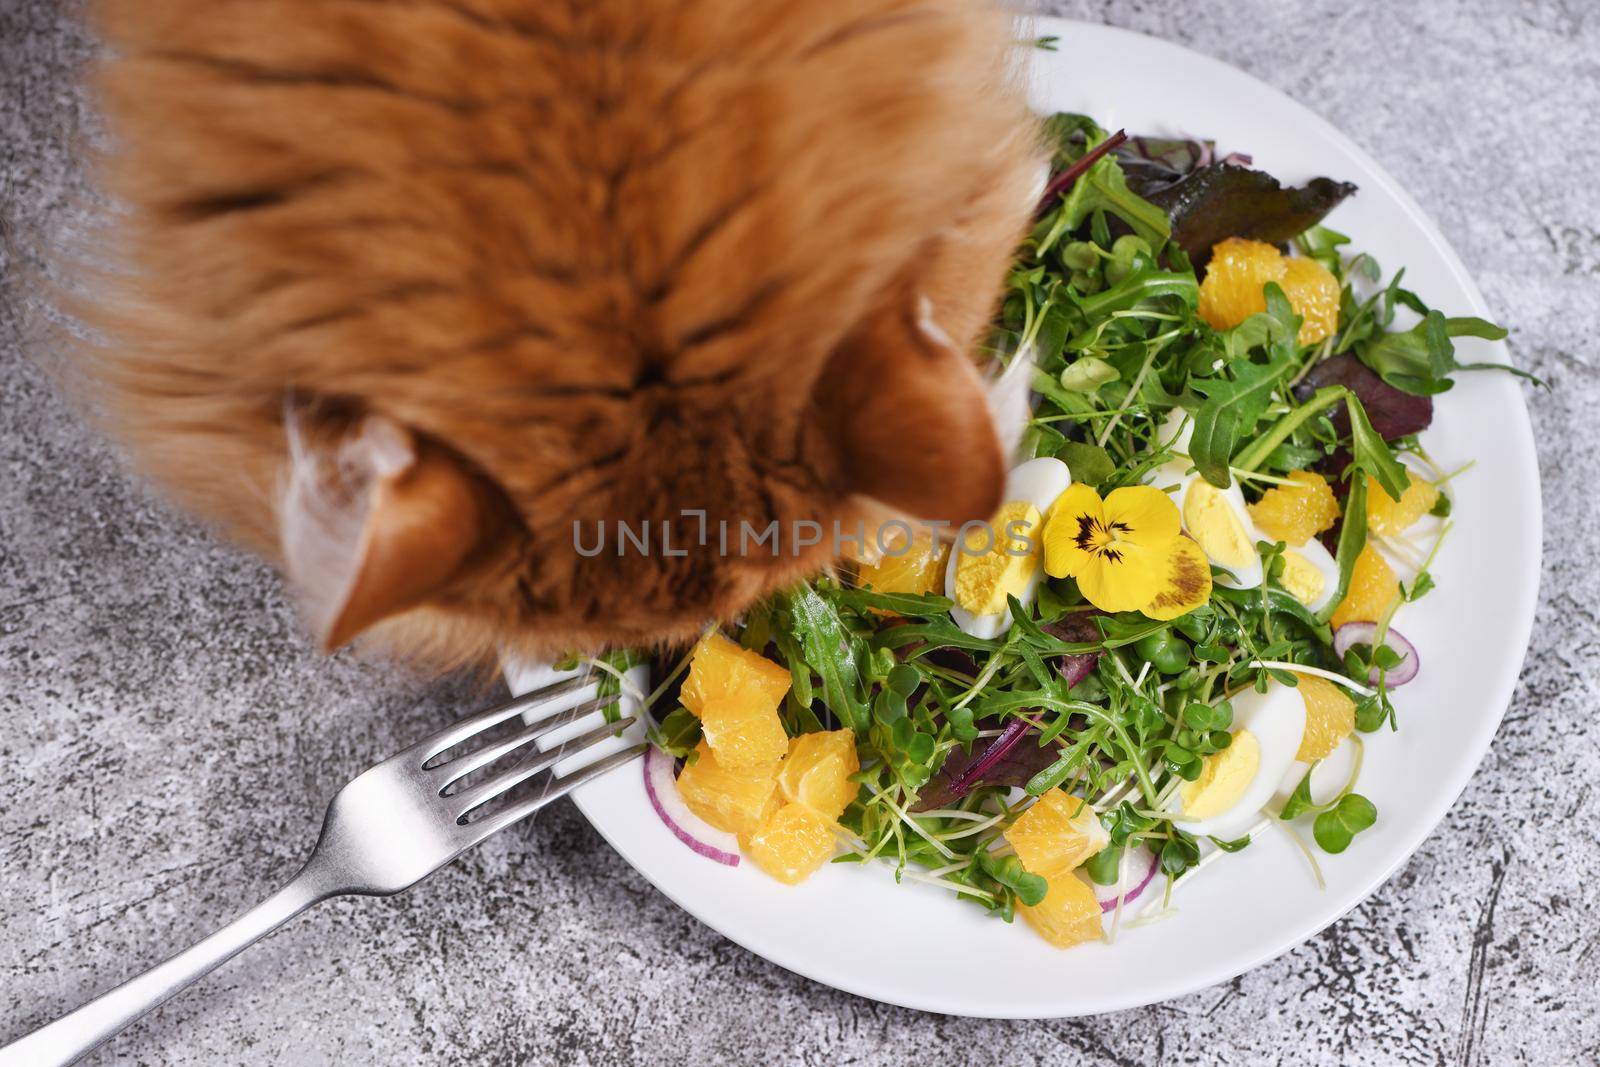 The ginger cat bent over a plate of fruit and vegetable salad.
The concept of organic, dietary, balanced pet food.